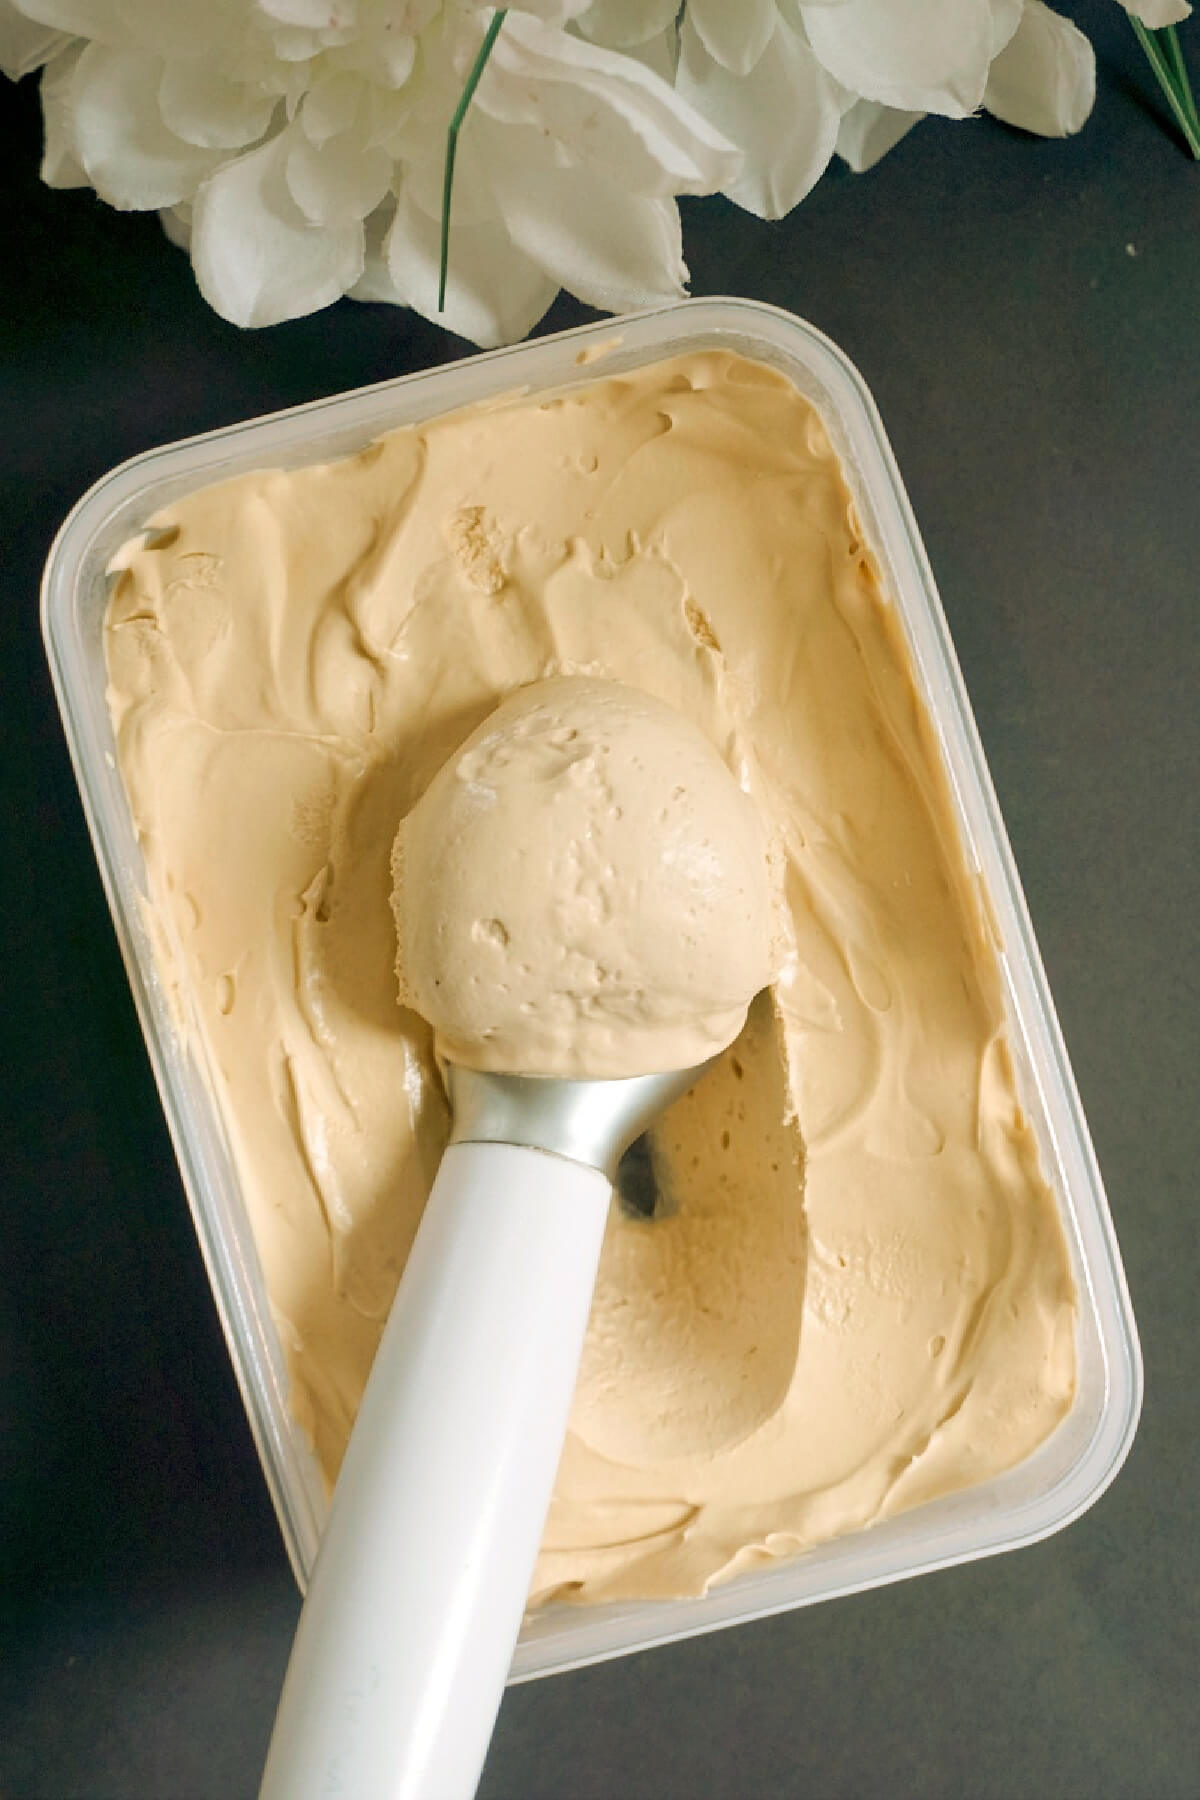 Overhead shoot of a container with coffee ice cream and an ice cream scoop.